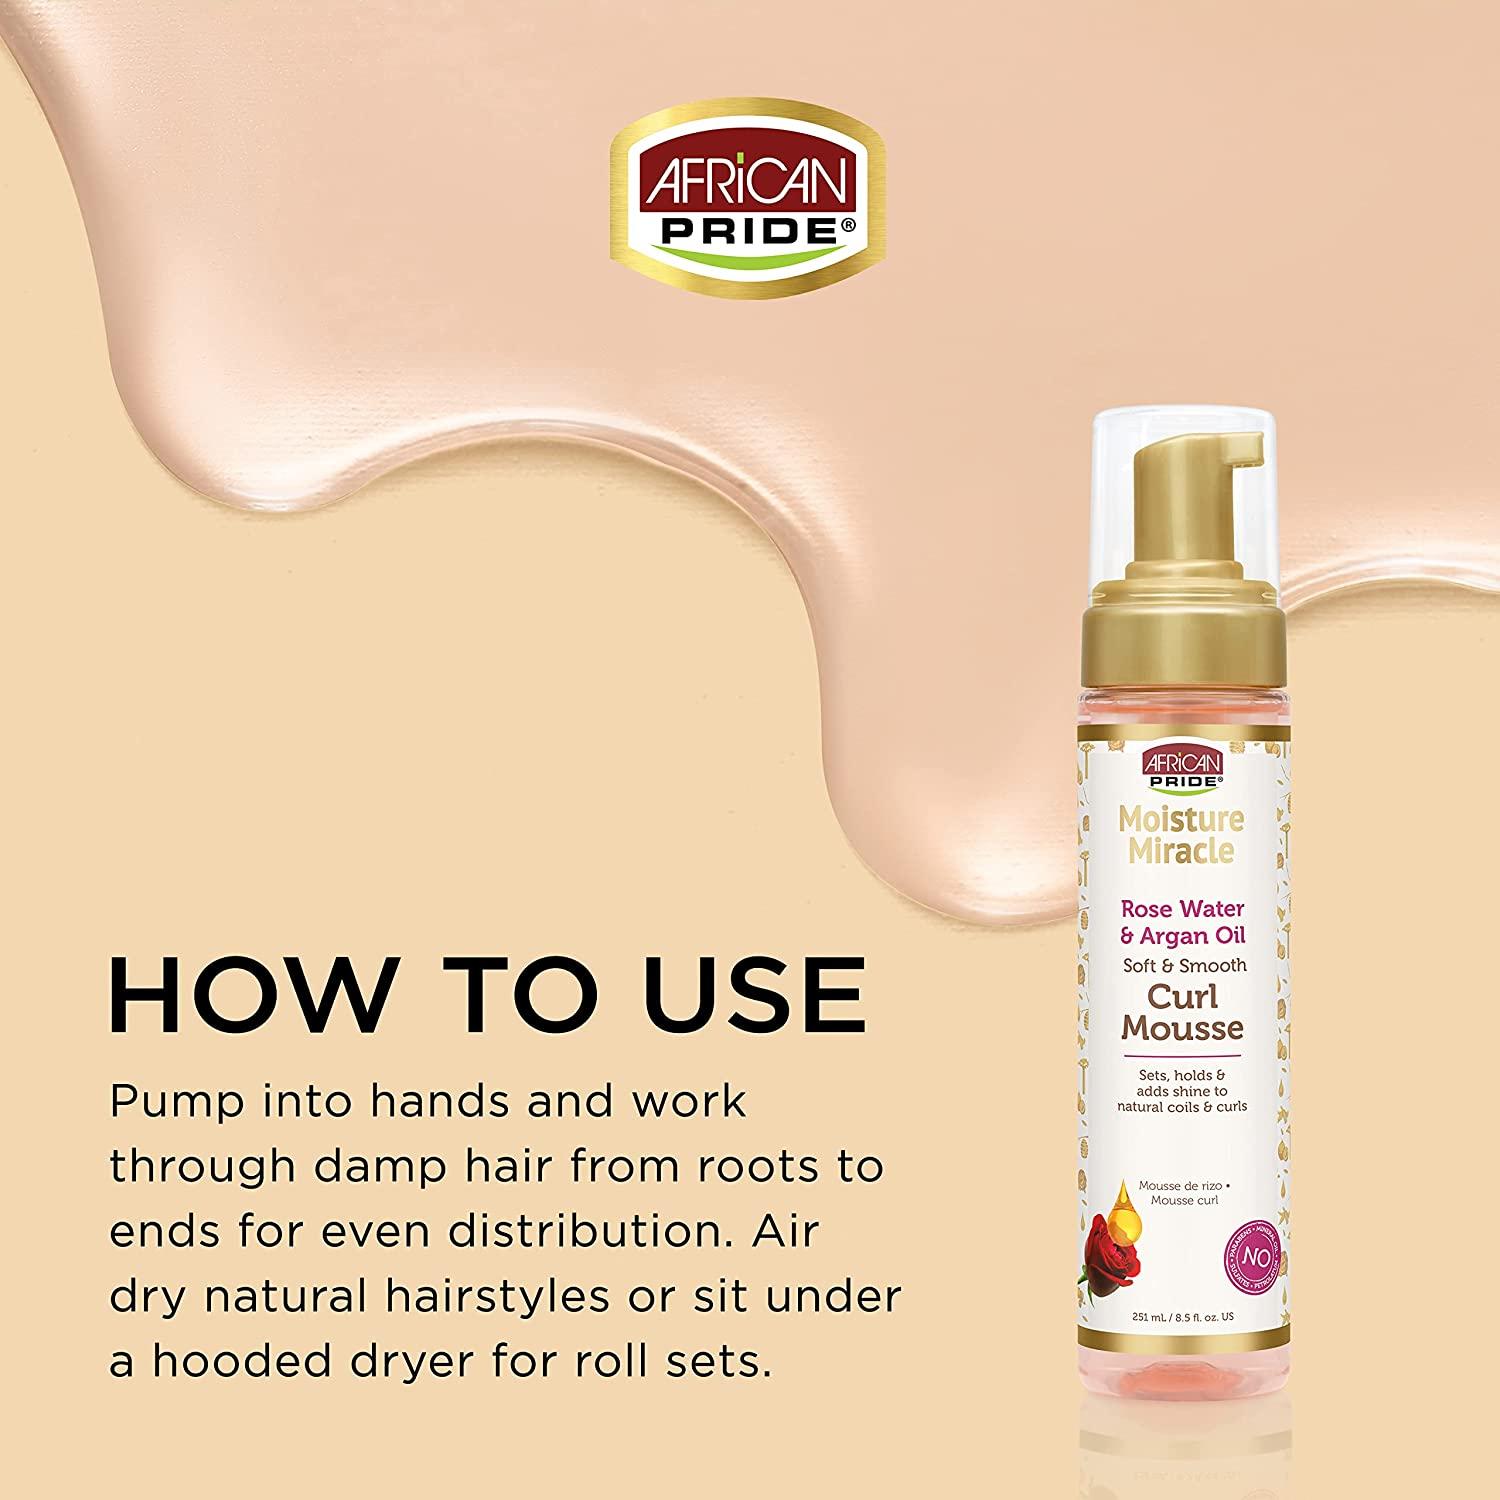 African Pride Moisture Miracle Rose Water & Argan Oil Curl Hair Mousse,  Flexible Hold, Enhances Curls, Creates Wave Patterns, No Residue, Deep  Moisture, Adds Shine, Strengthens & Protects Hair,  oz